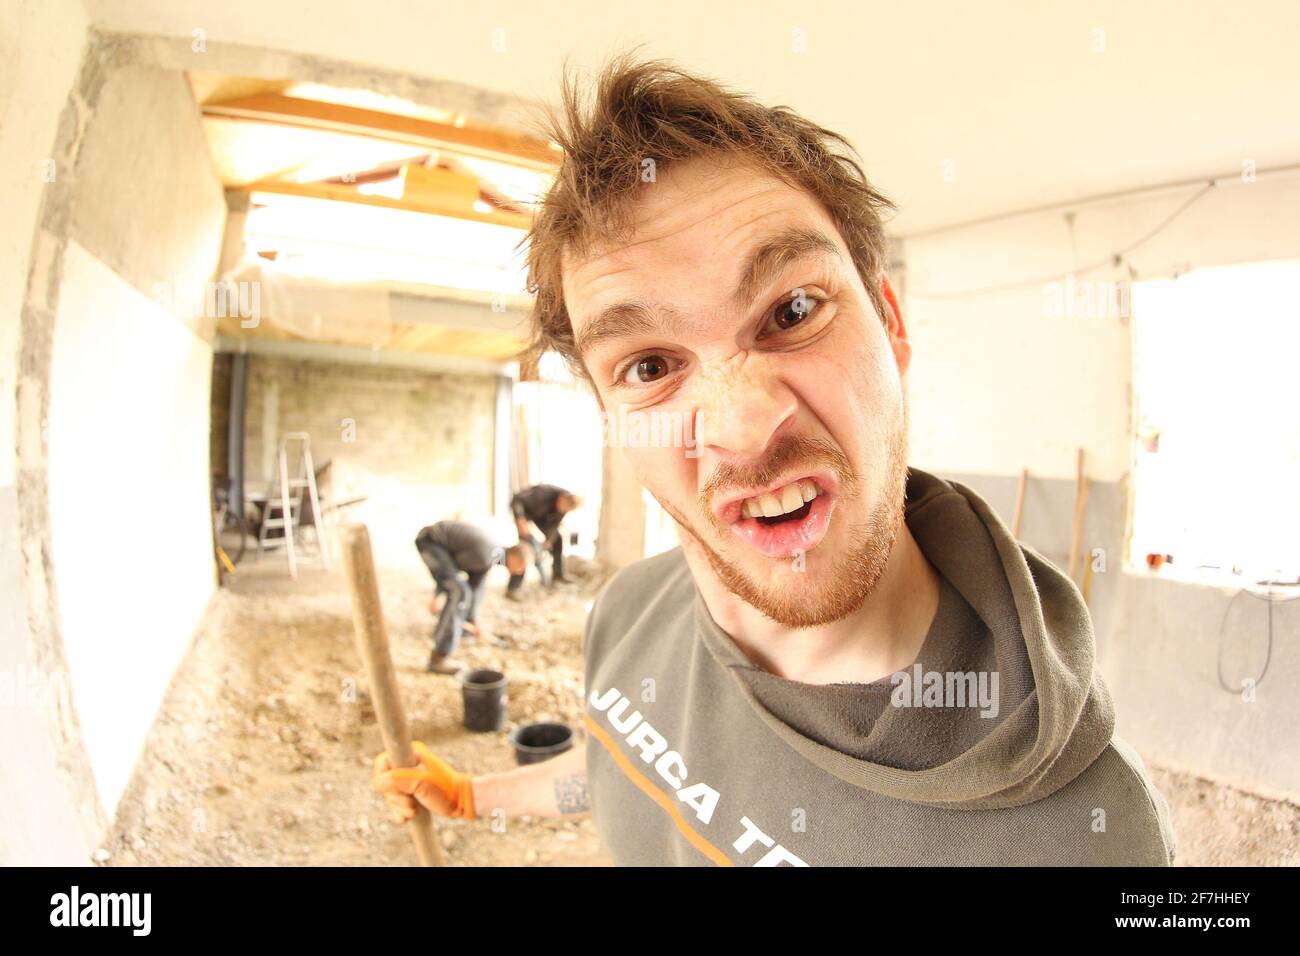 A worker making a stupid face while renovating a house. Other workers in a background. fisheye view. Stock Photo